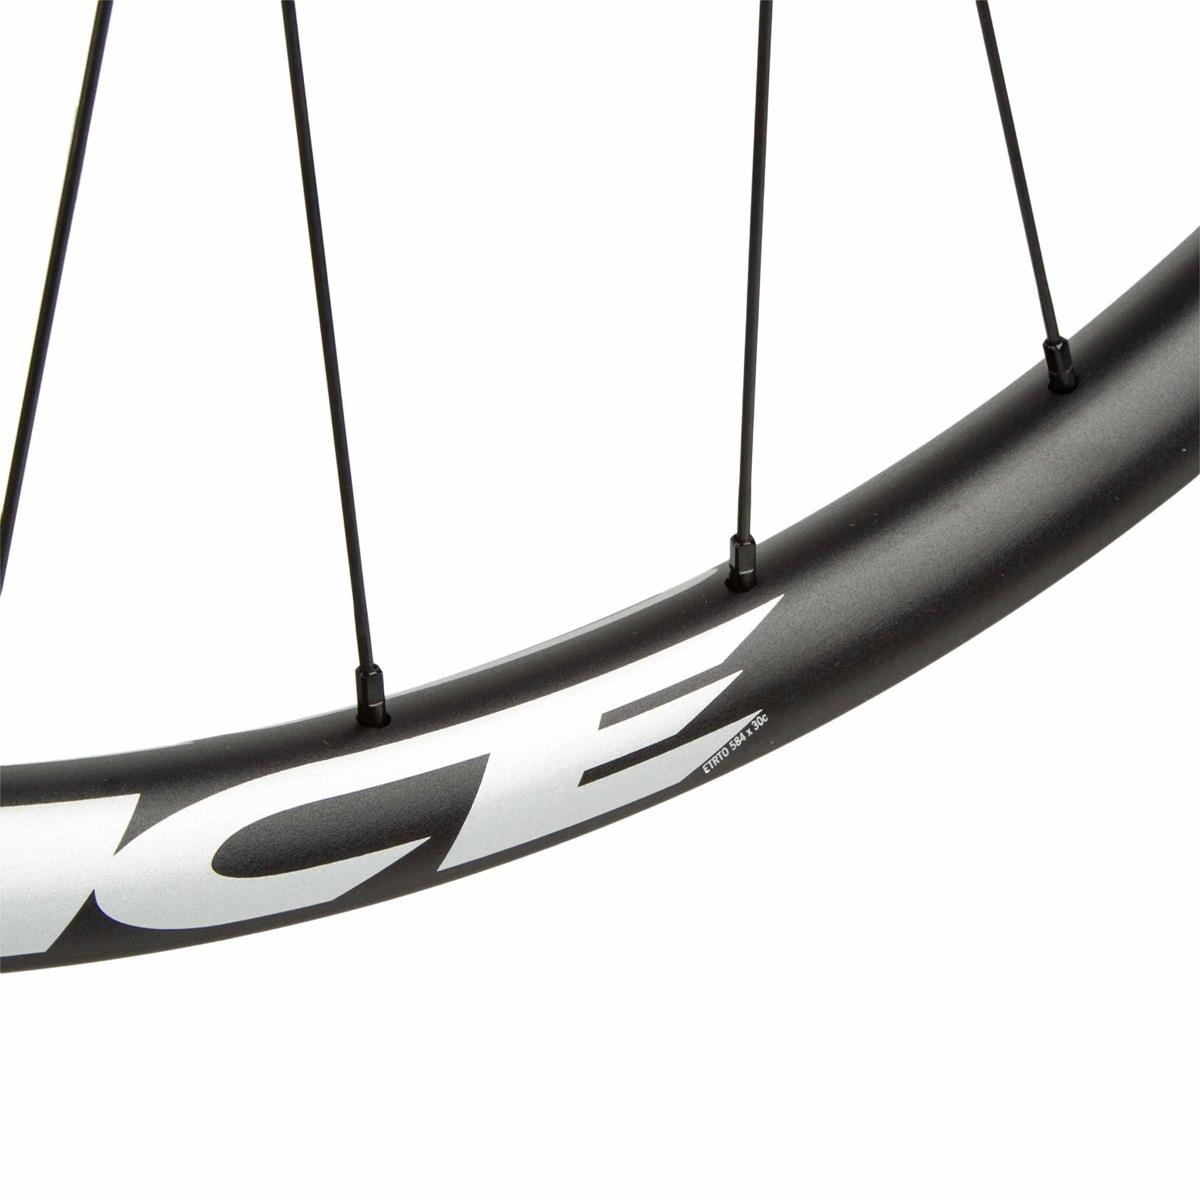 RaceFace Performance Products bicycle sticker 4.5" long 